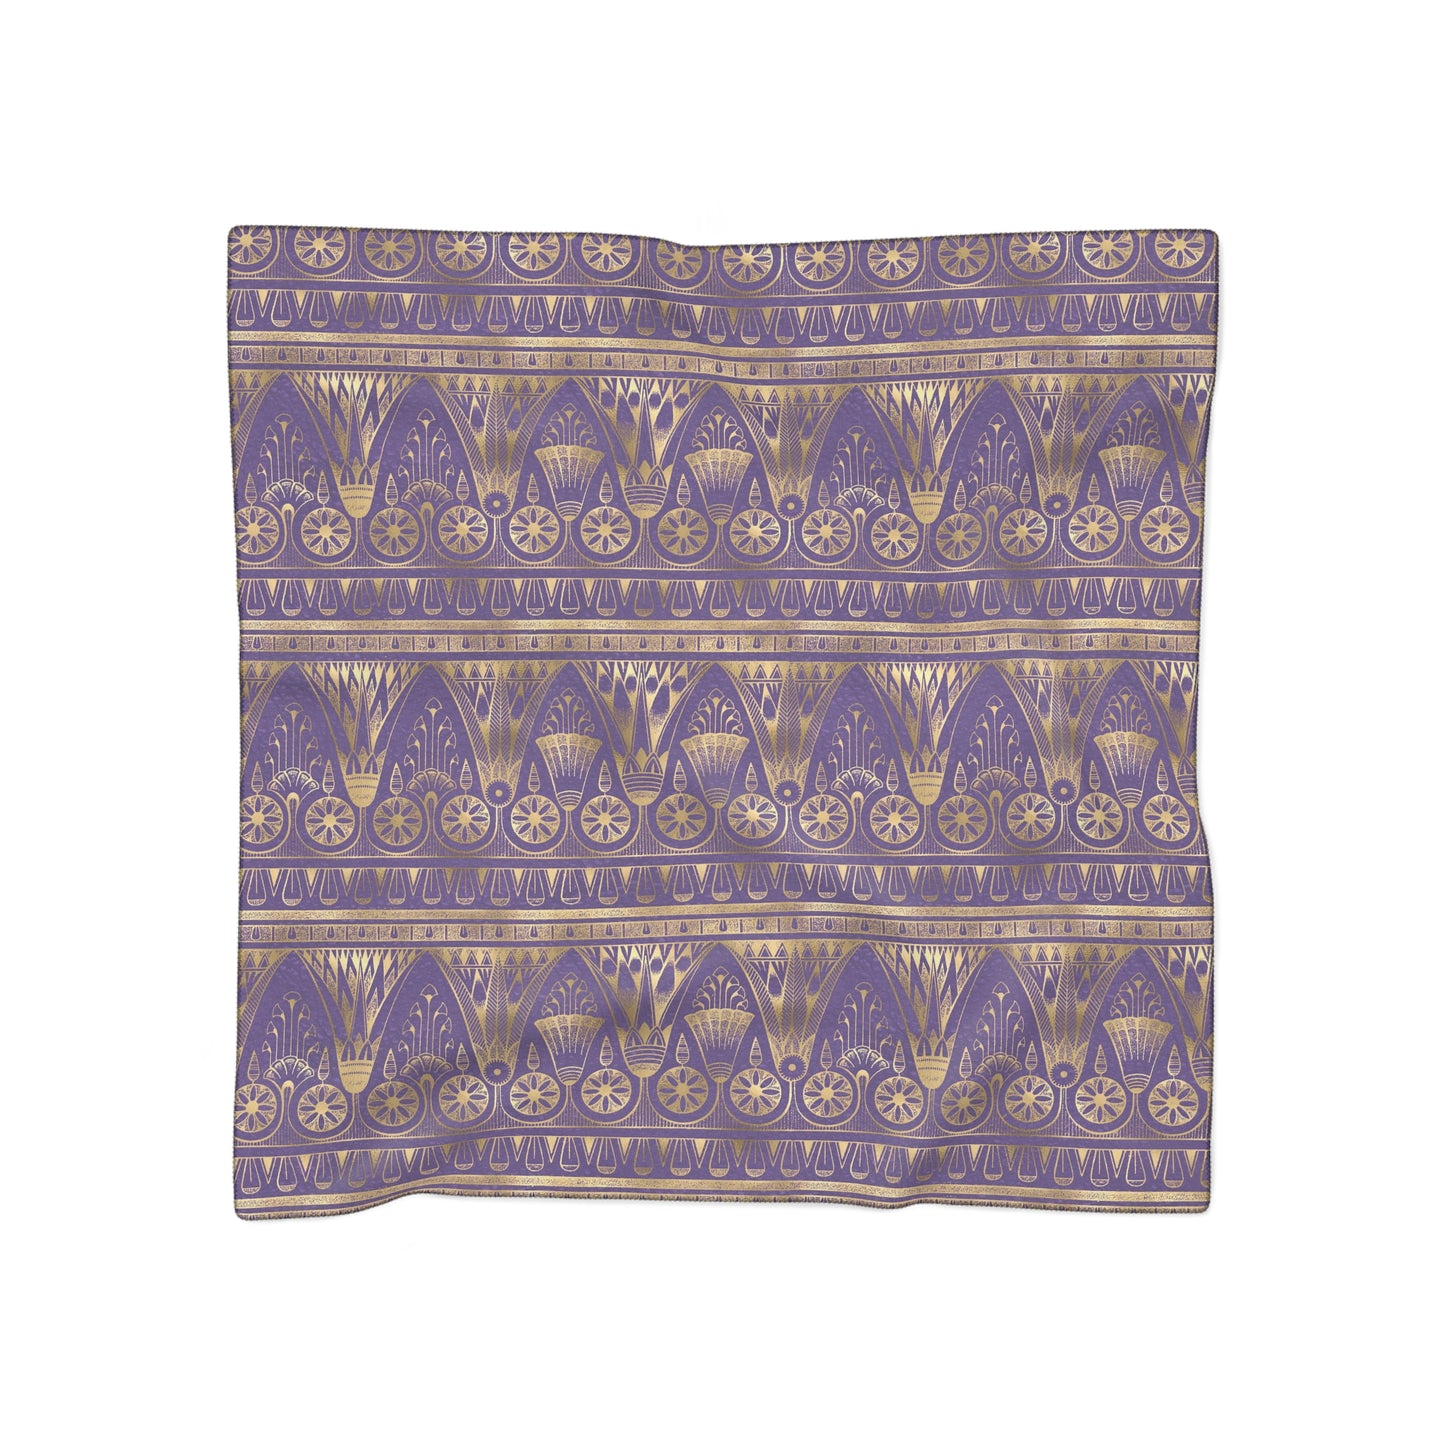 Purple & Gold Egyptian Inspired Witches Veil | Pagan Witchy Scarf